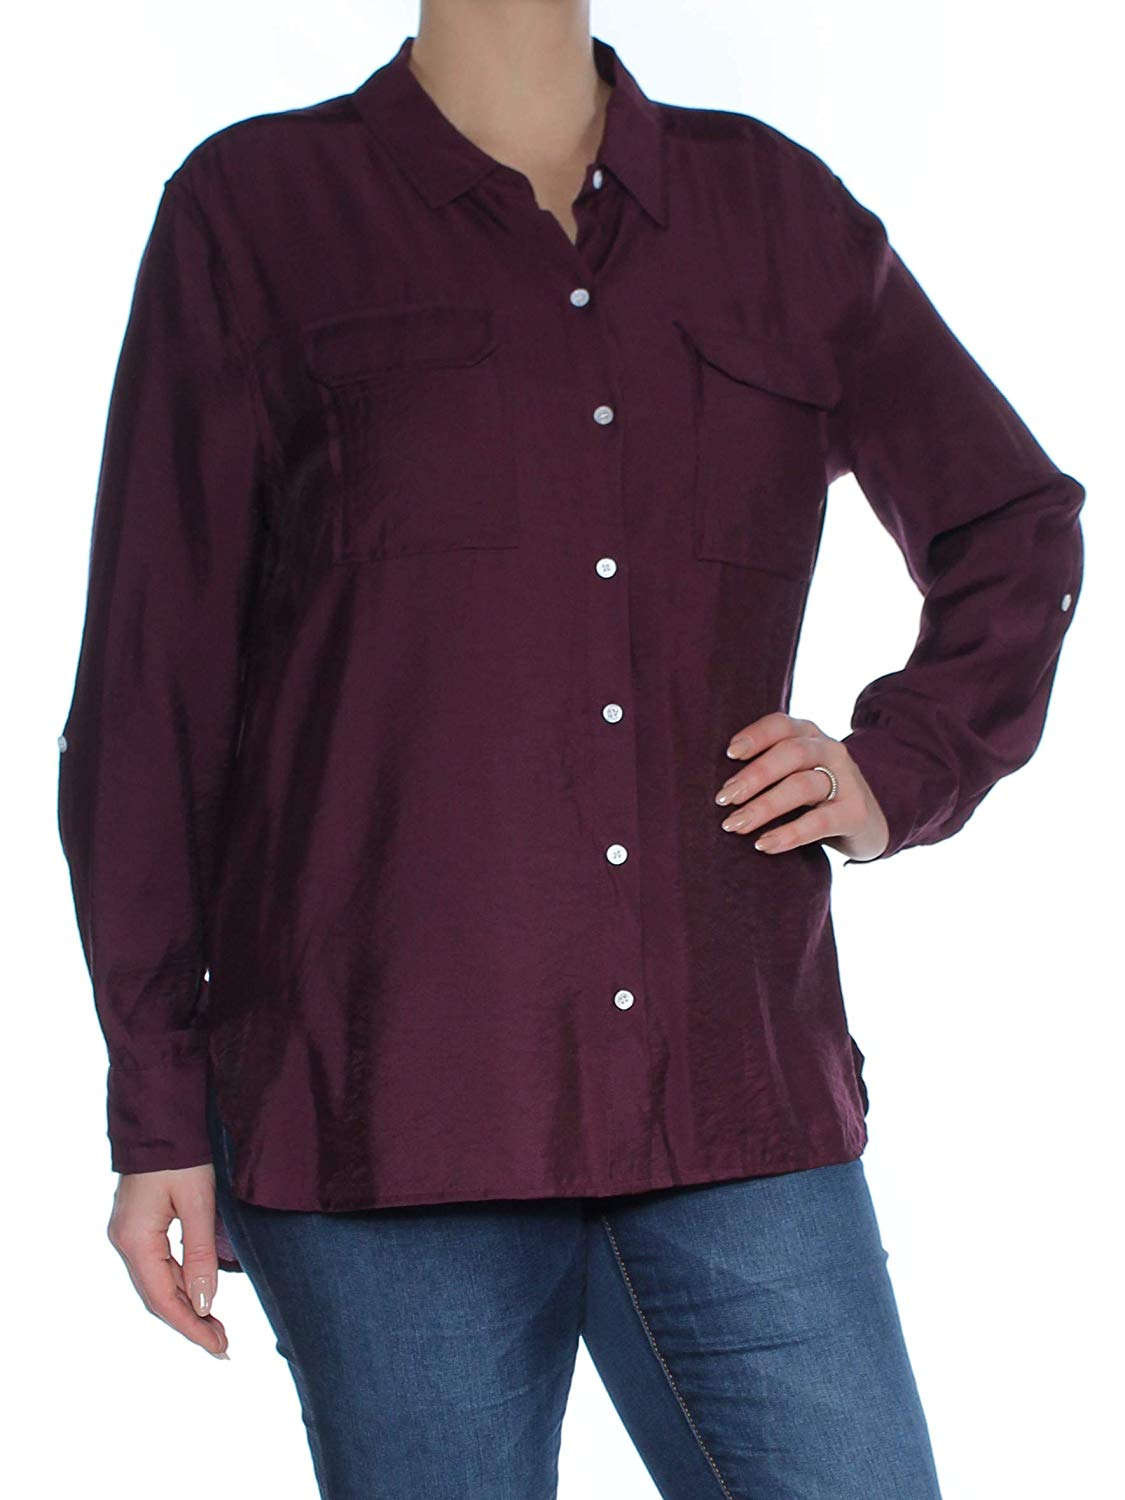 TWO Womens Maroon Collared Cuffed Button Up Top L